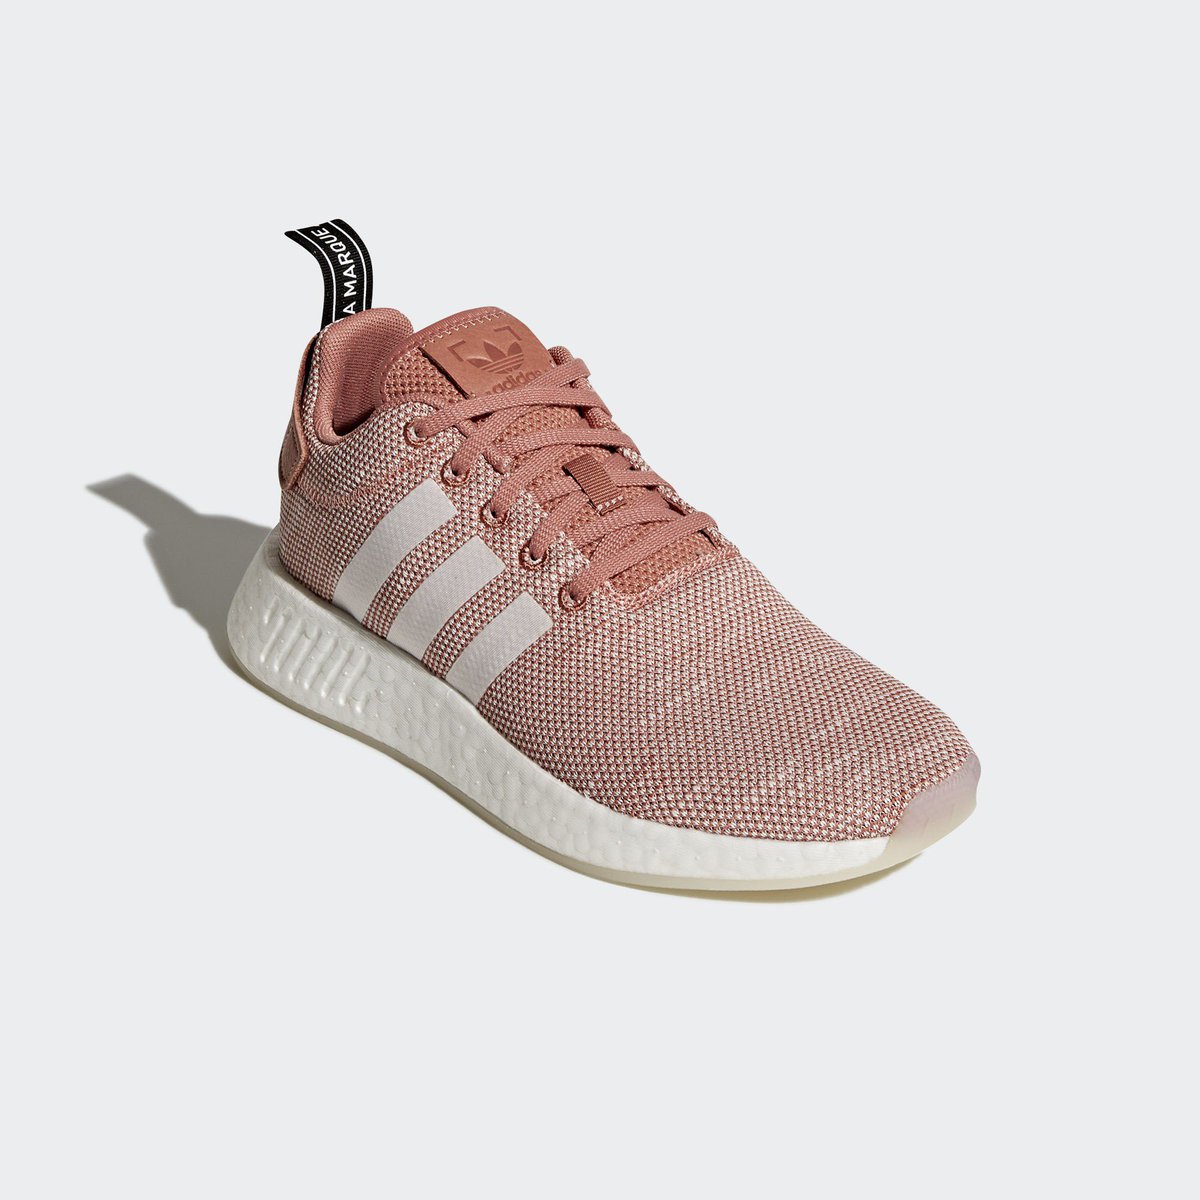 8. Adidas NMD R2 for WomenSize: UK5.5 and 6N/p: RM580, now: RM199